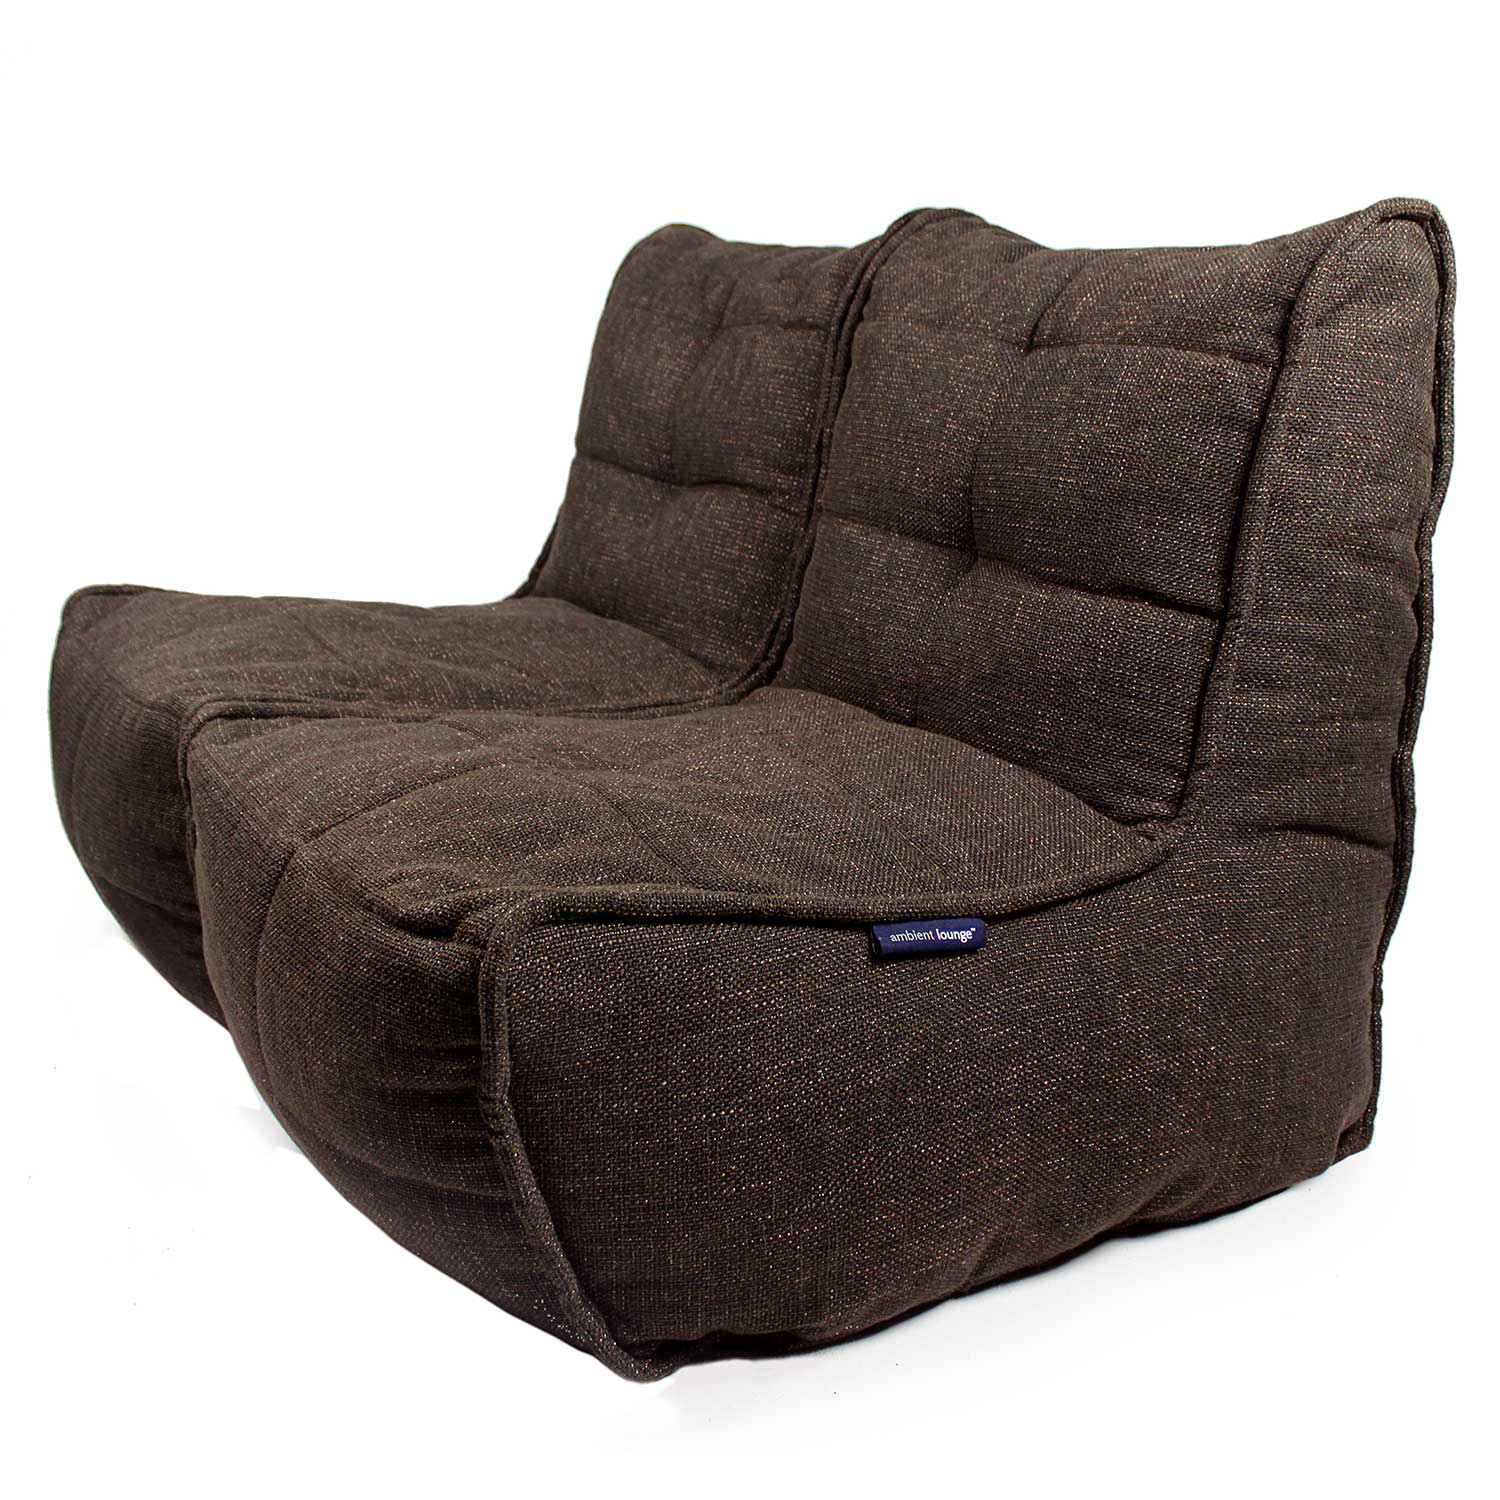 Twin couch bean bag sofa in hot chocolate